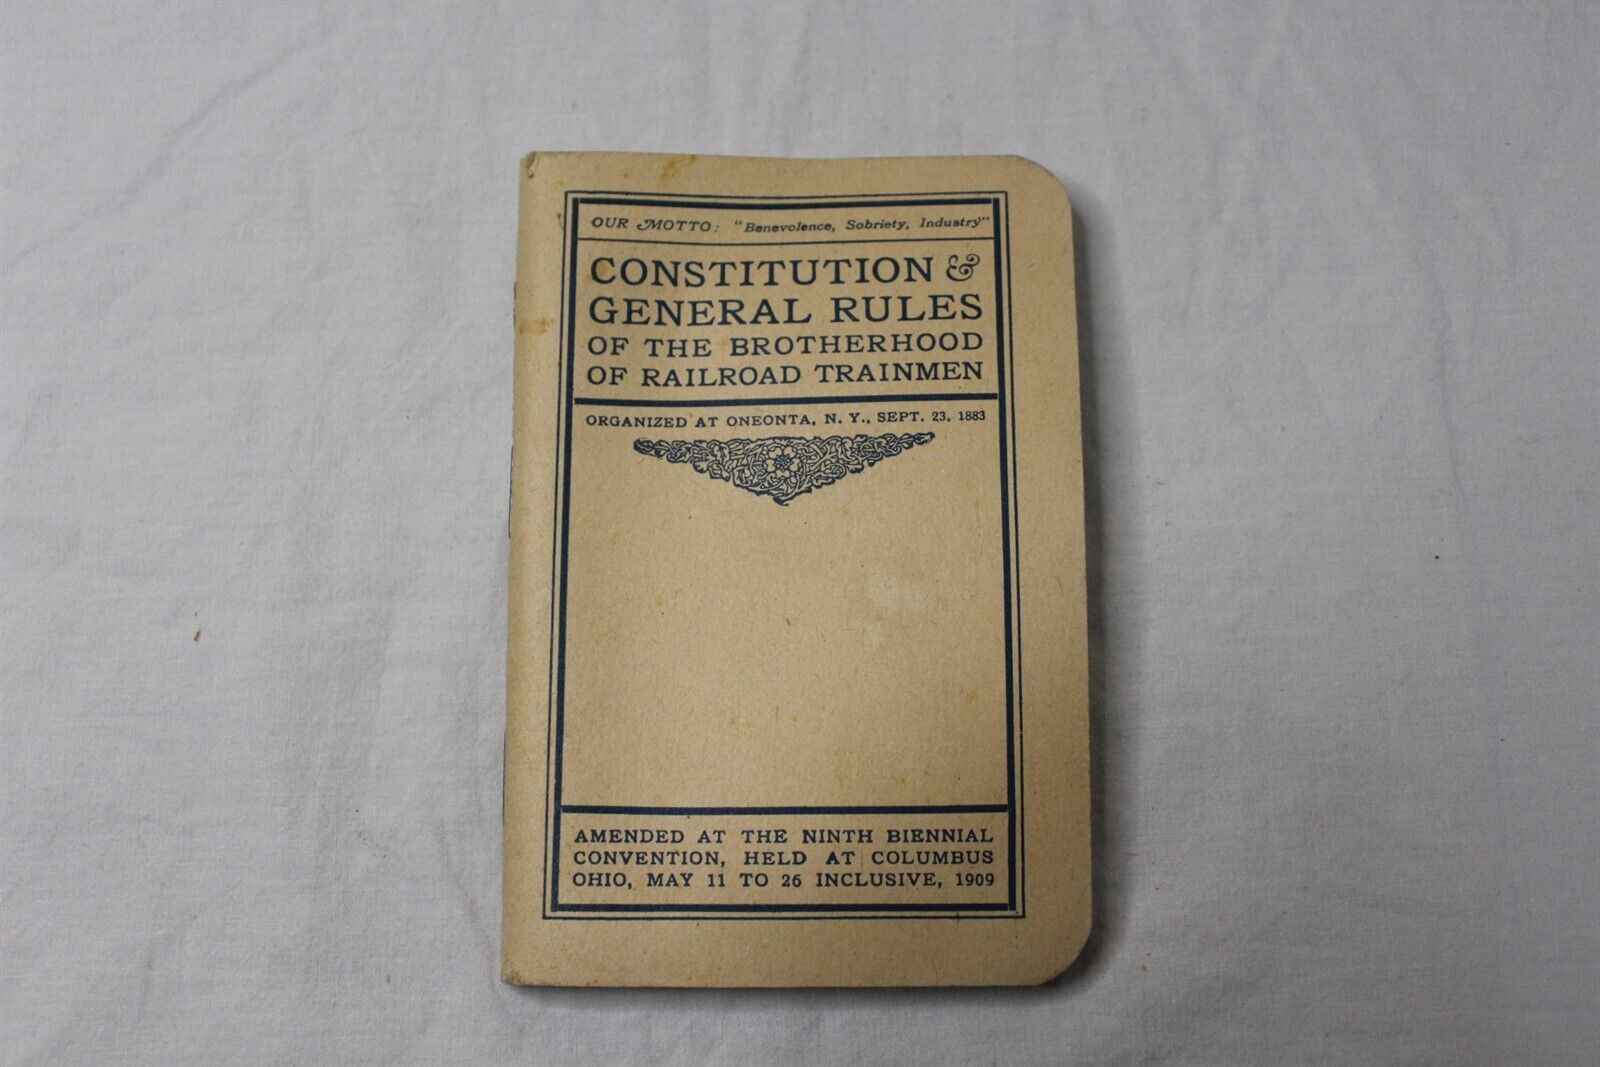  Ca. 1909 Constitution & Rules Of The Brotherhood Of Railroad Trainmen Antique